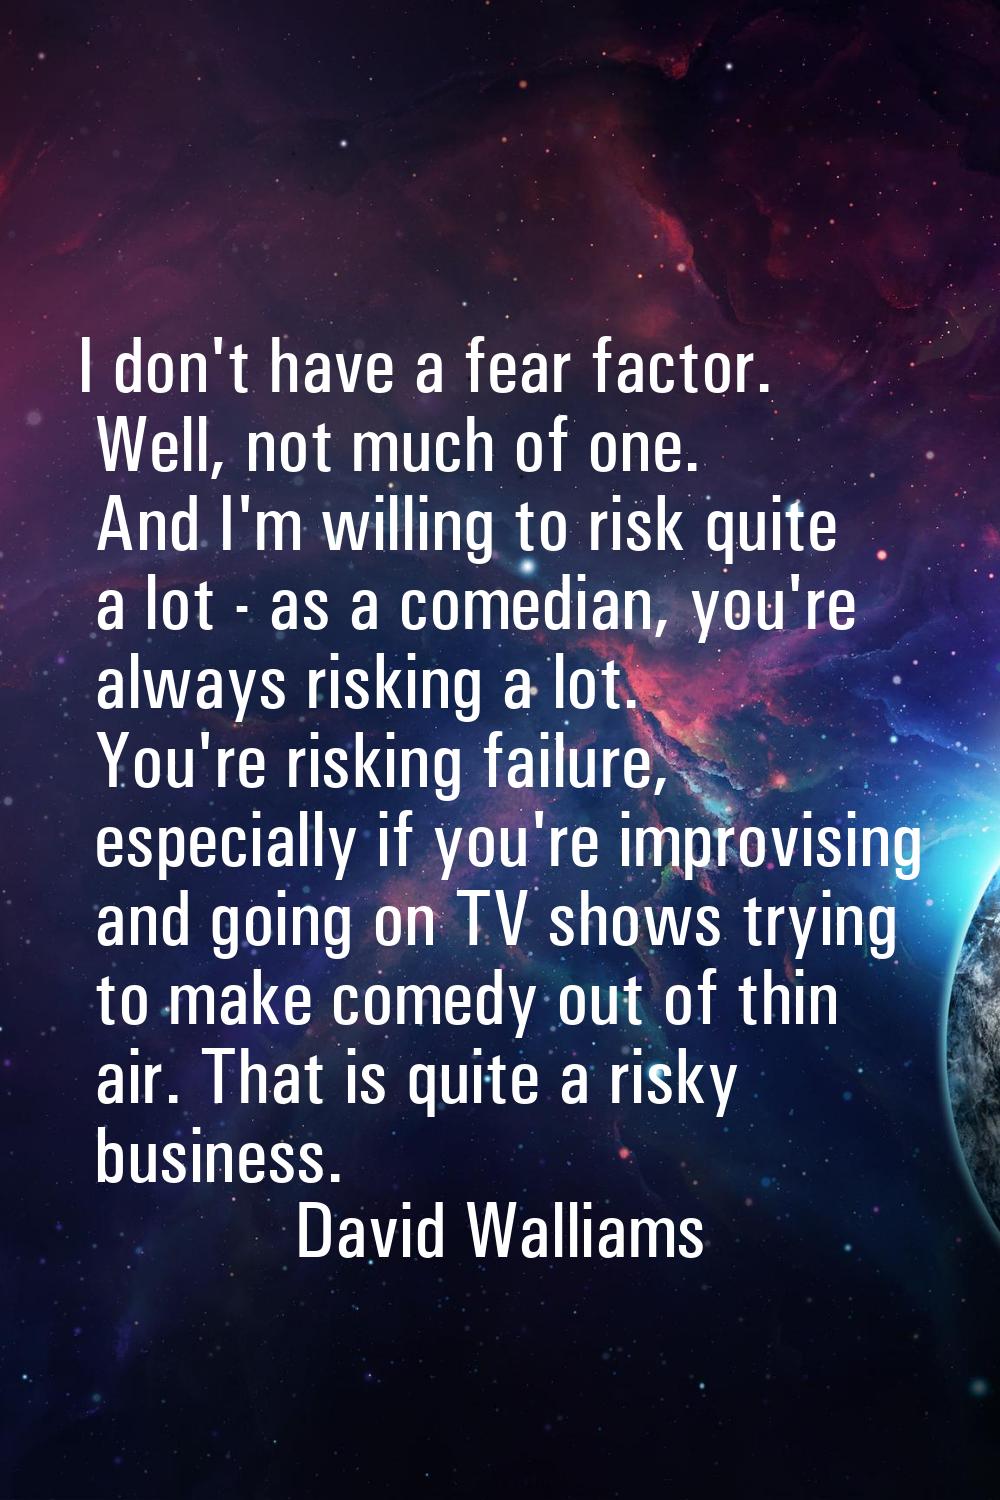 I don't have a fear factor. Well, not much of one. And I'm willing to risk quite a lot - as a comed